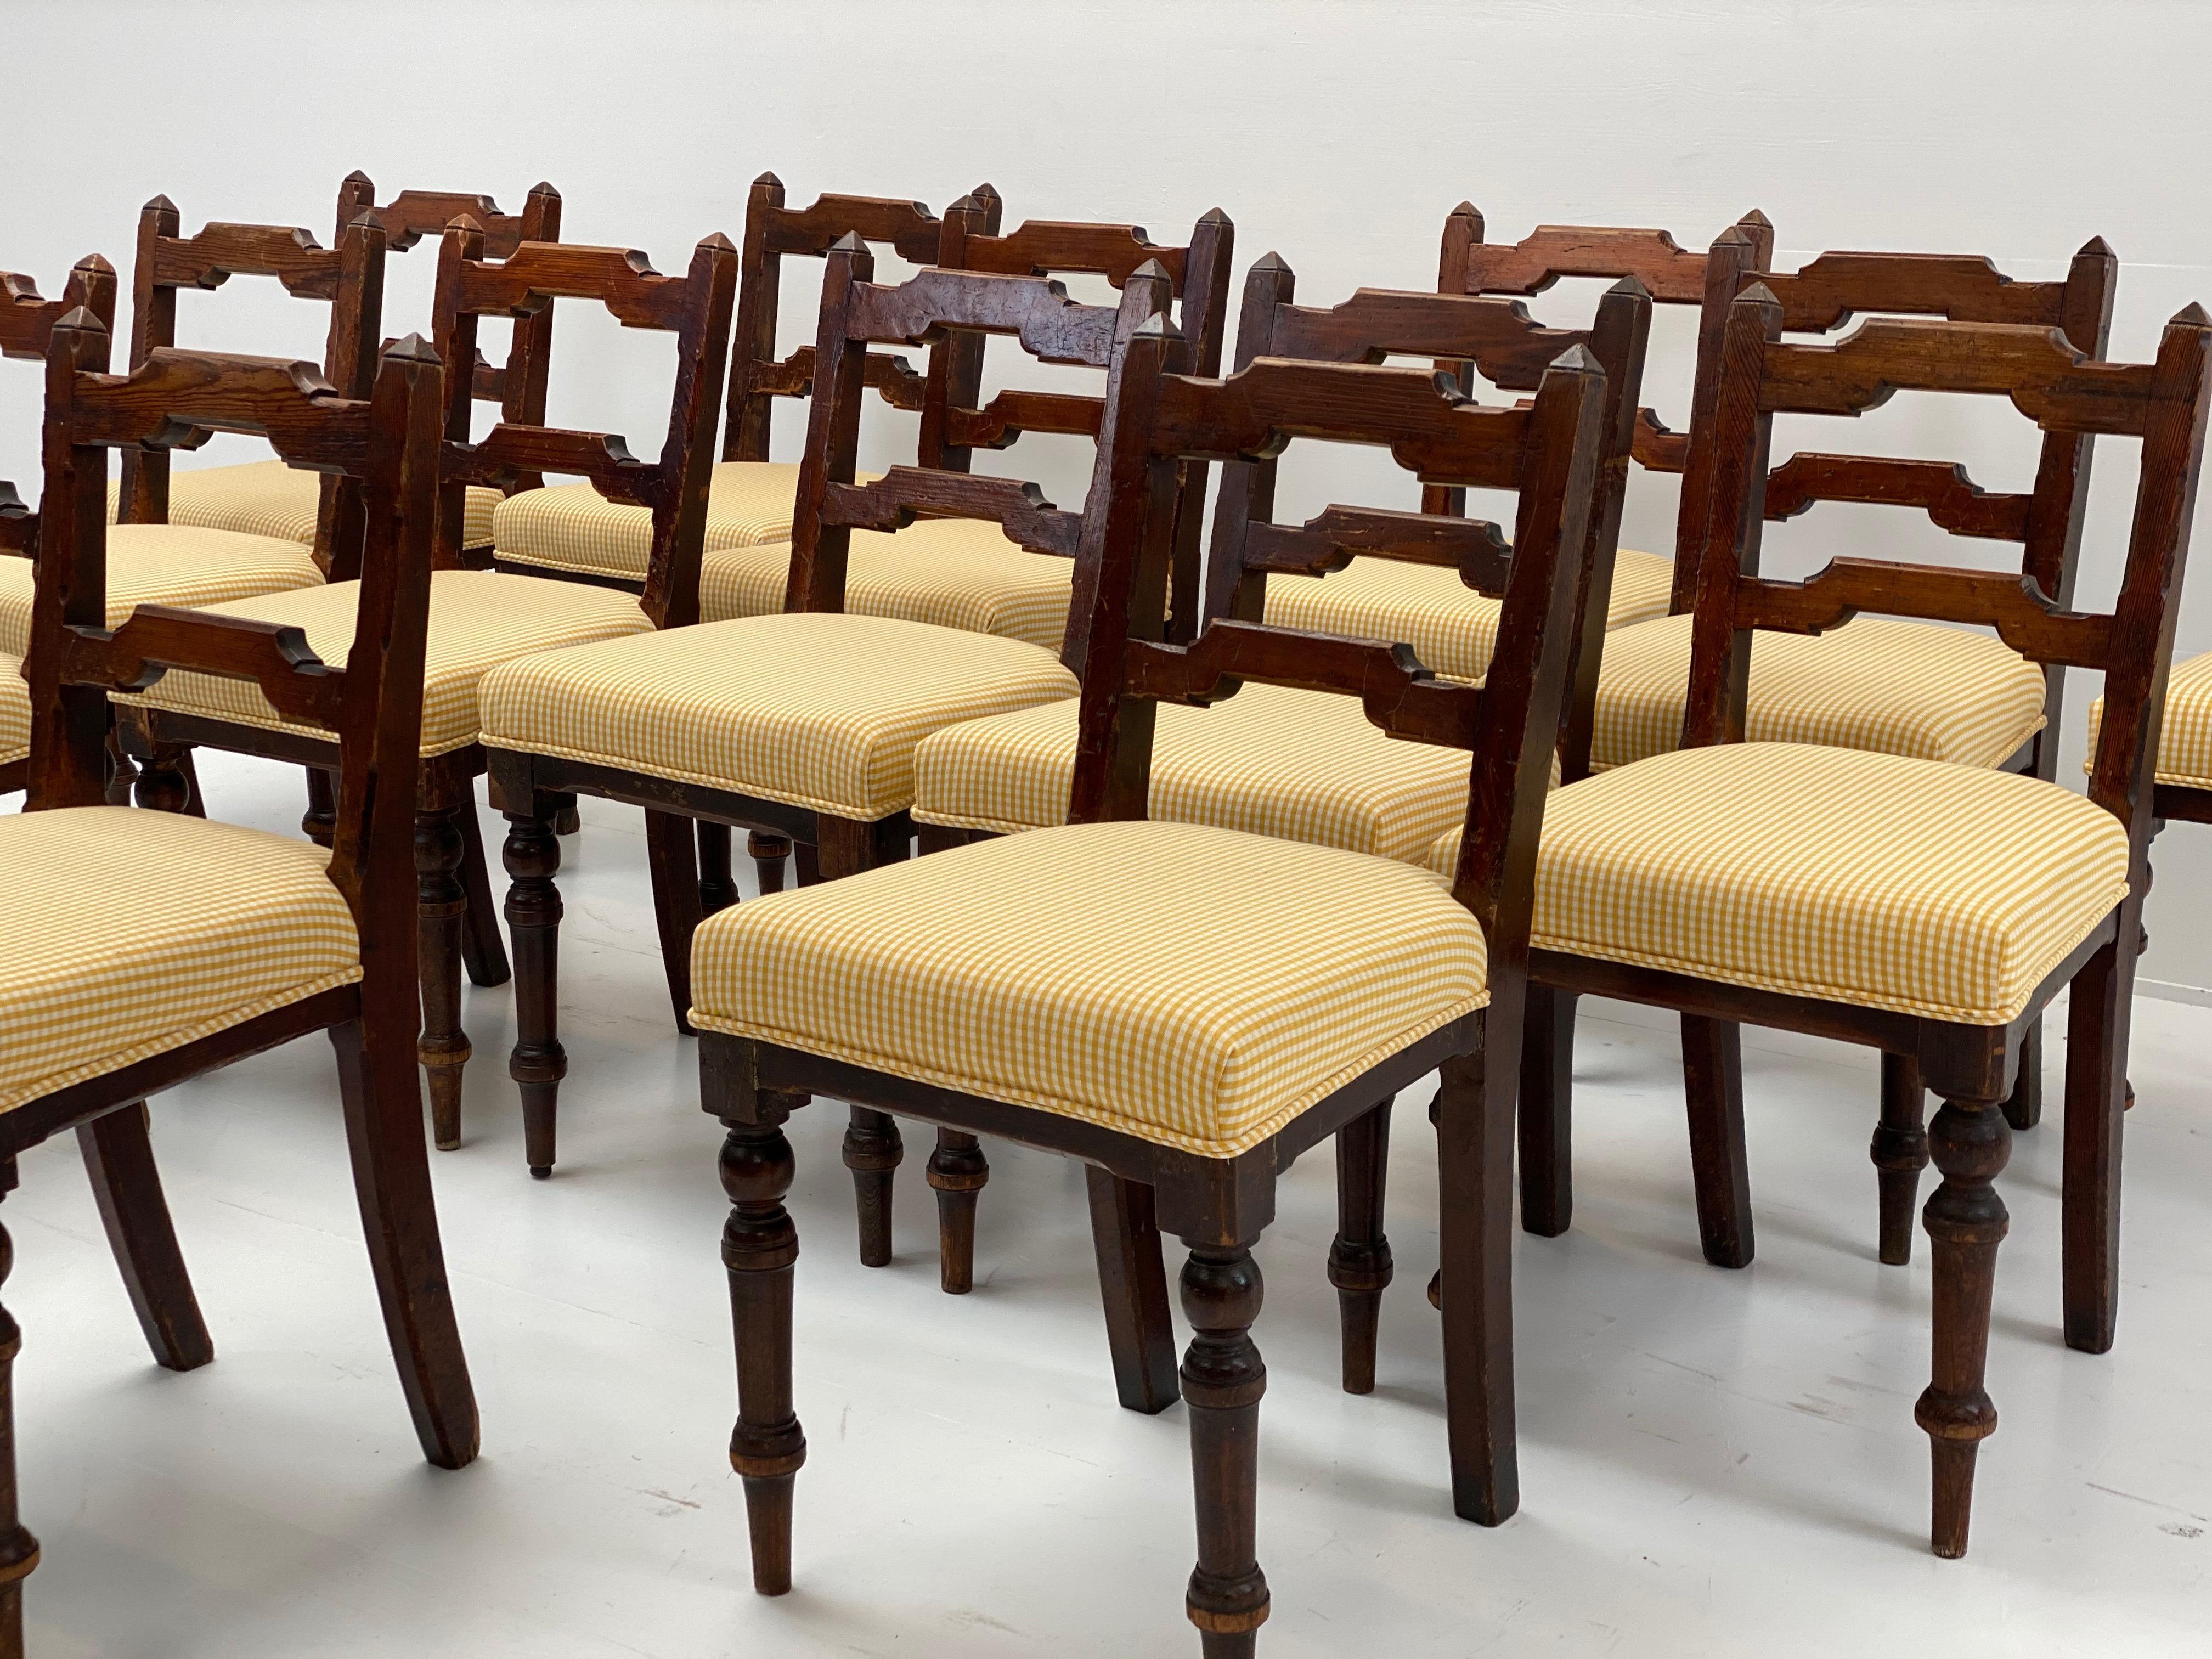 Rare Set of 14 Rustic Chairs in Pine with New Upholstery, Ireland 8